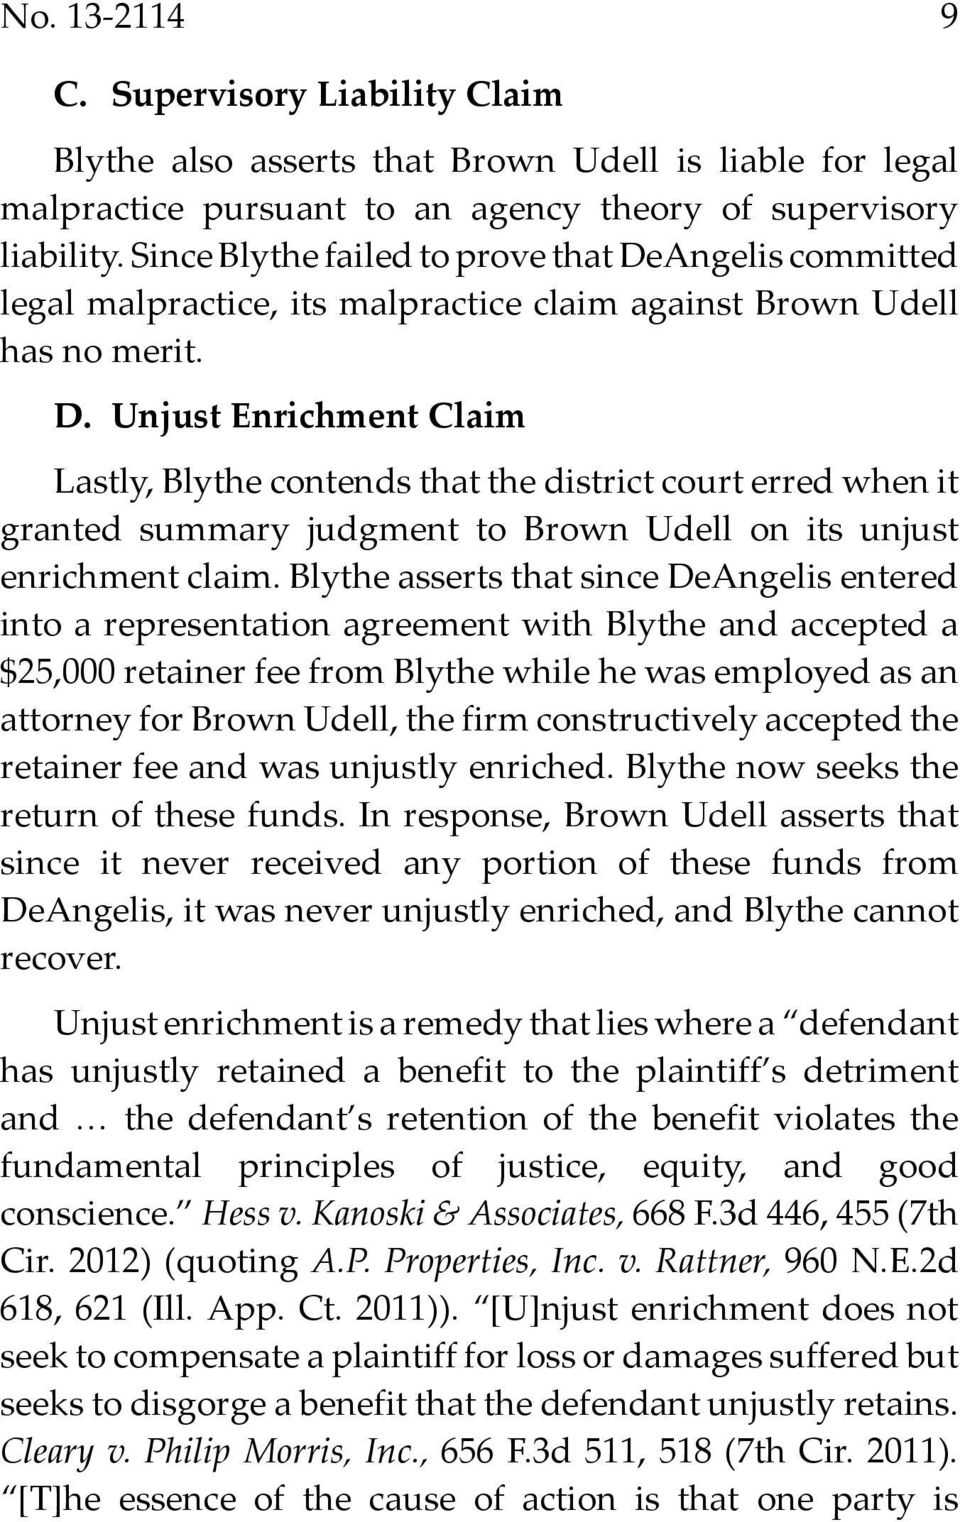 Blythe asserts that since DeAngelis entered into a representation agreement with Blythe and accepted a $25,000 retainer fee from Blythe while he was employed as an attorney for Brown Udell, the firm